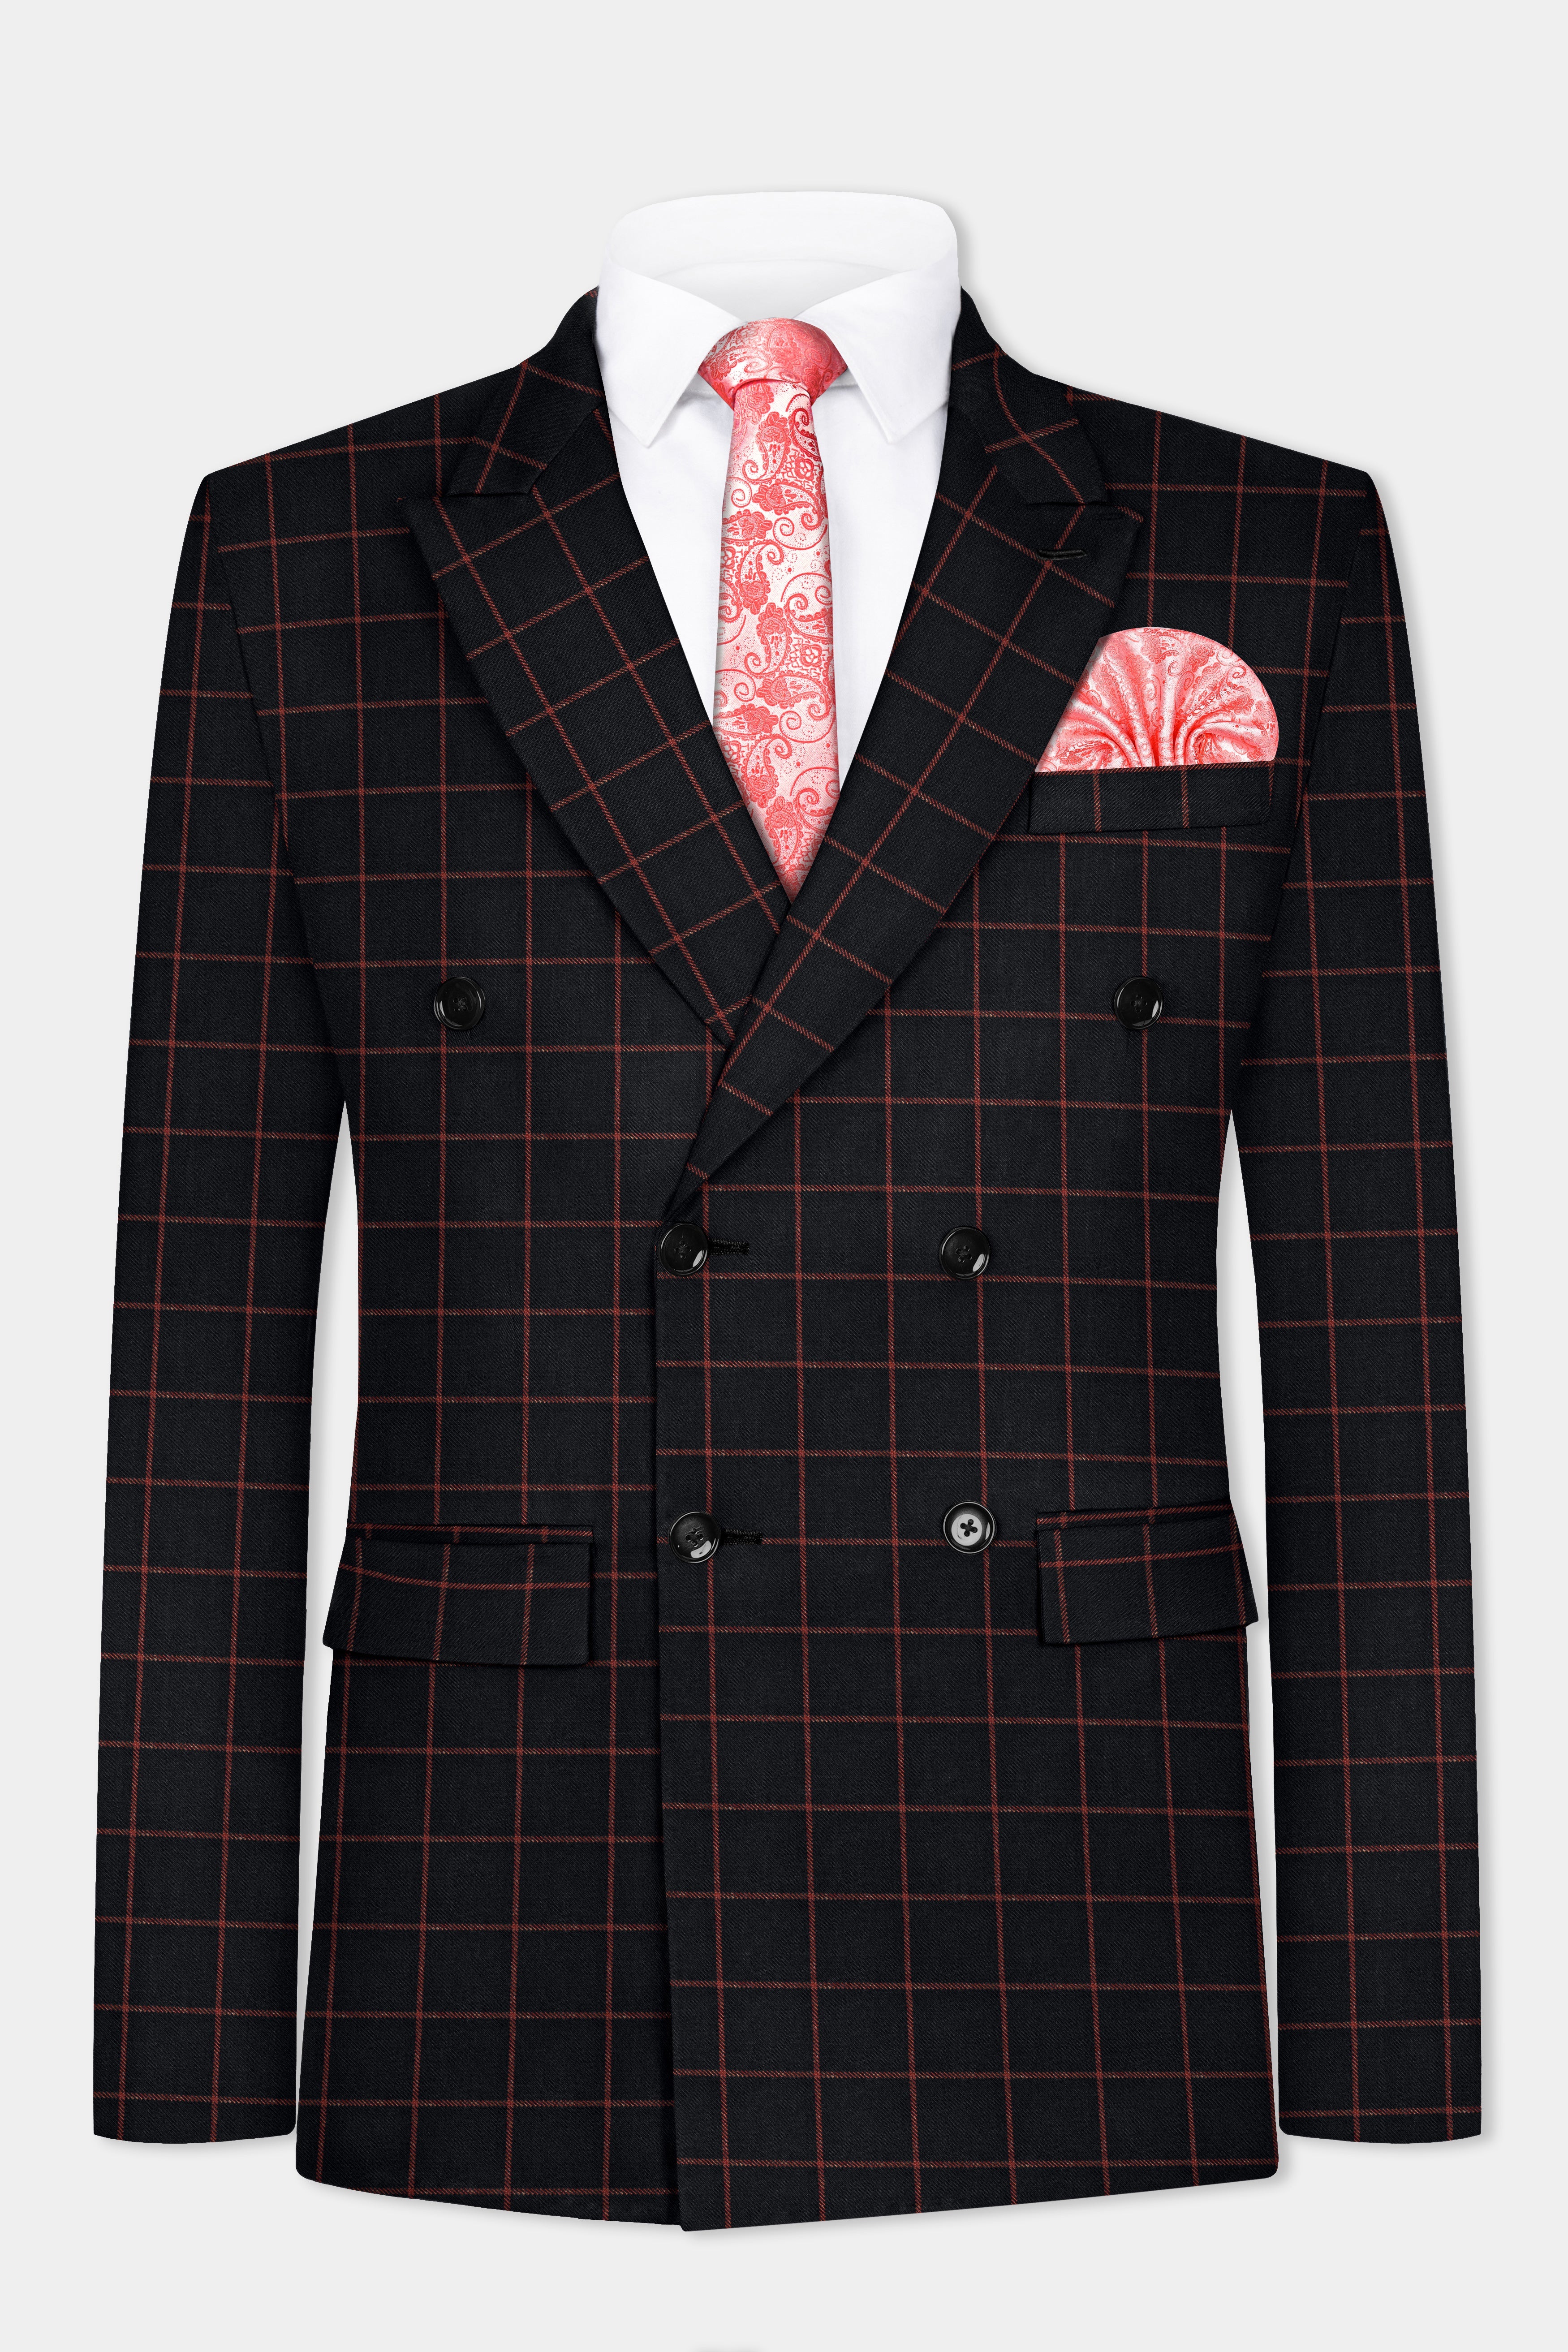 Bright White with Moccaccino Brown Windowpane Double Breasted Tweed Suit